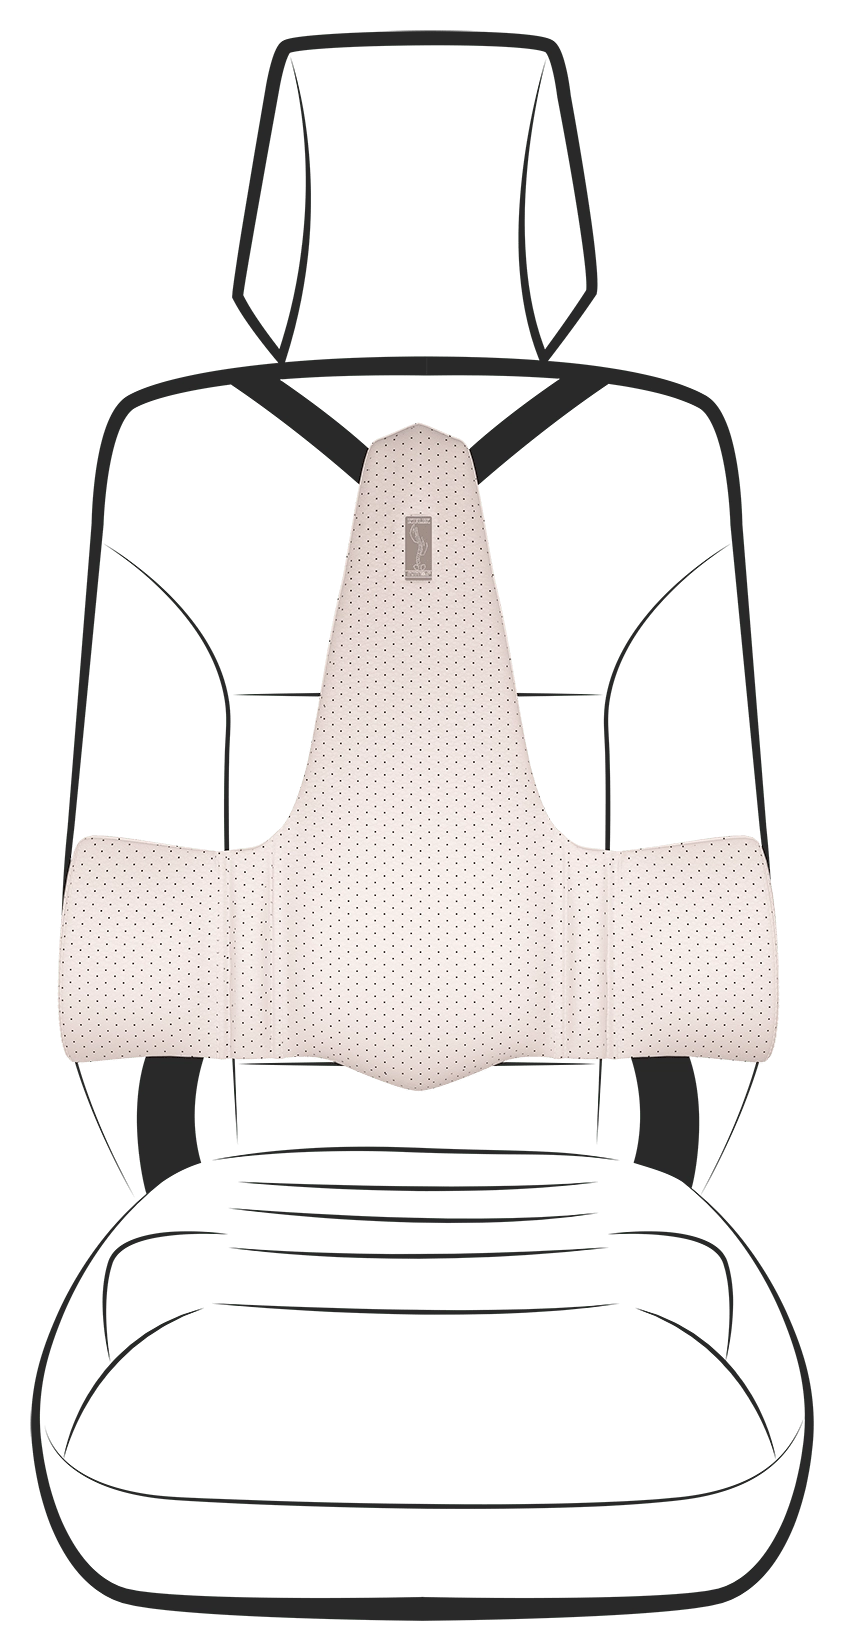 KULIK SYSTEM - New Lumbar Support for Car - Innovative Car Back Support -  Car Seat Cushions for Lower Back Pain Relief - Lower Back Pillow for Car 